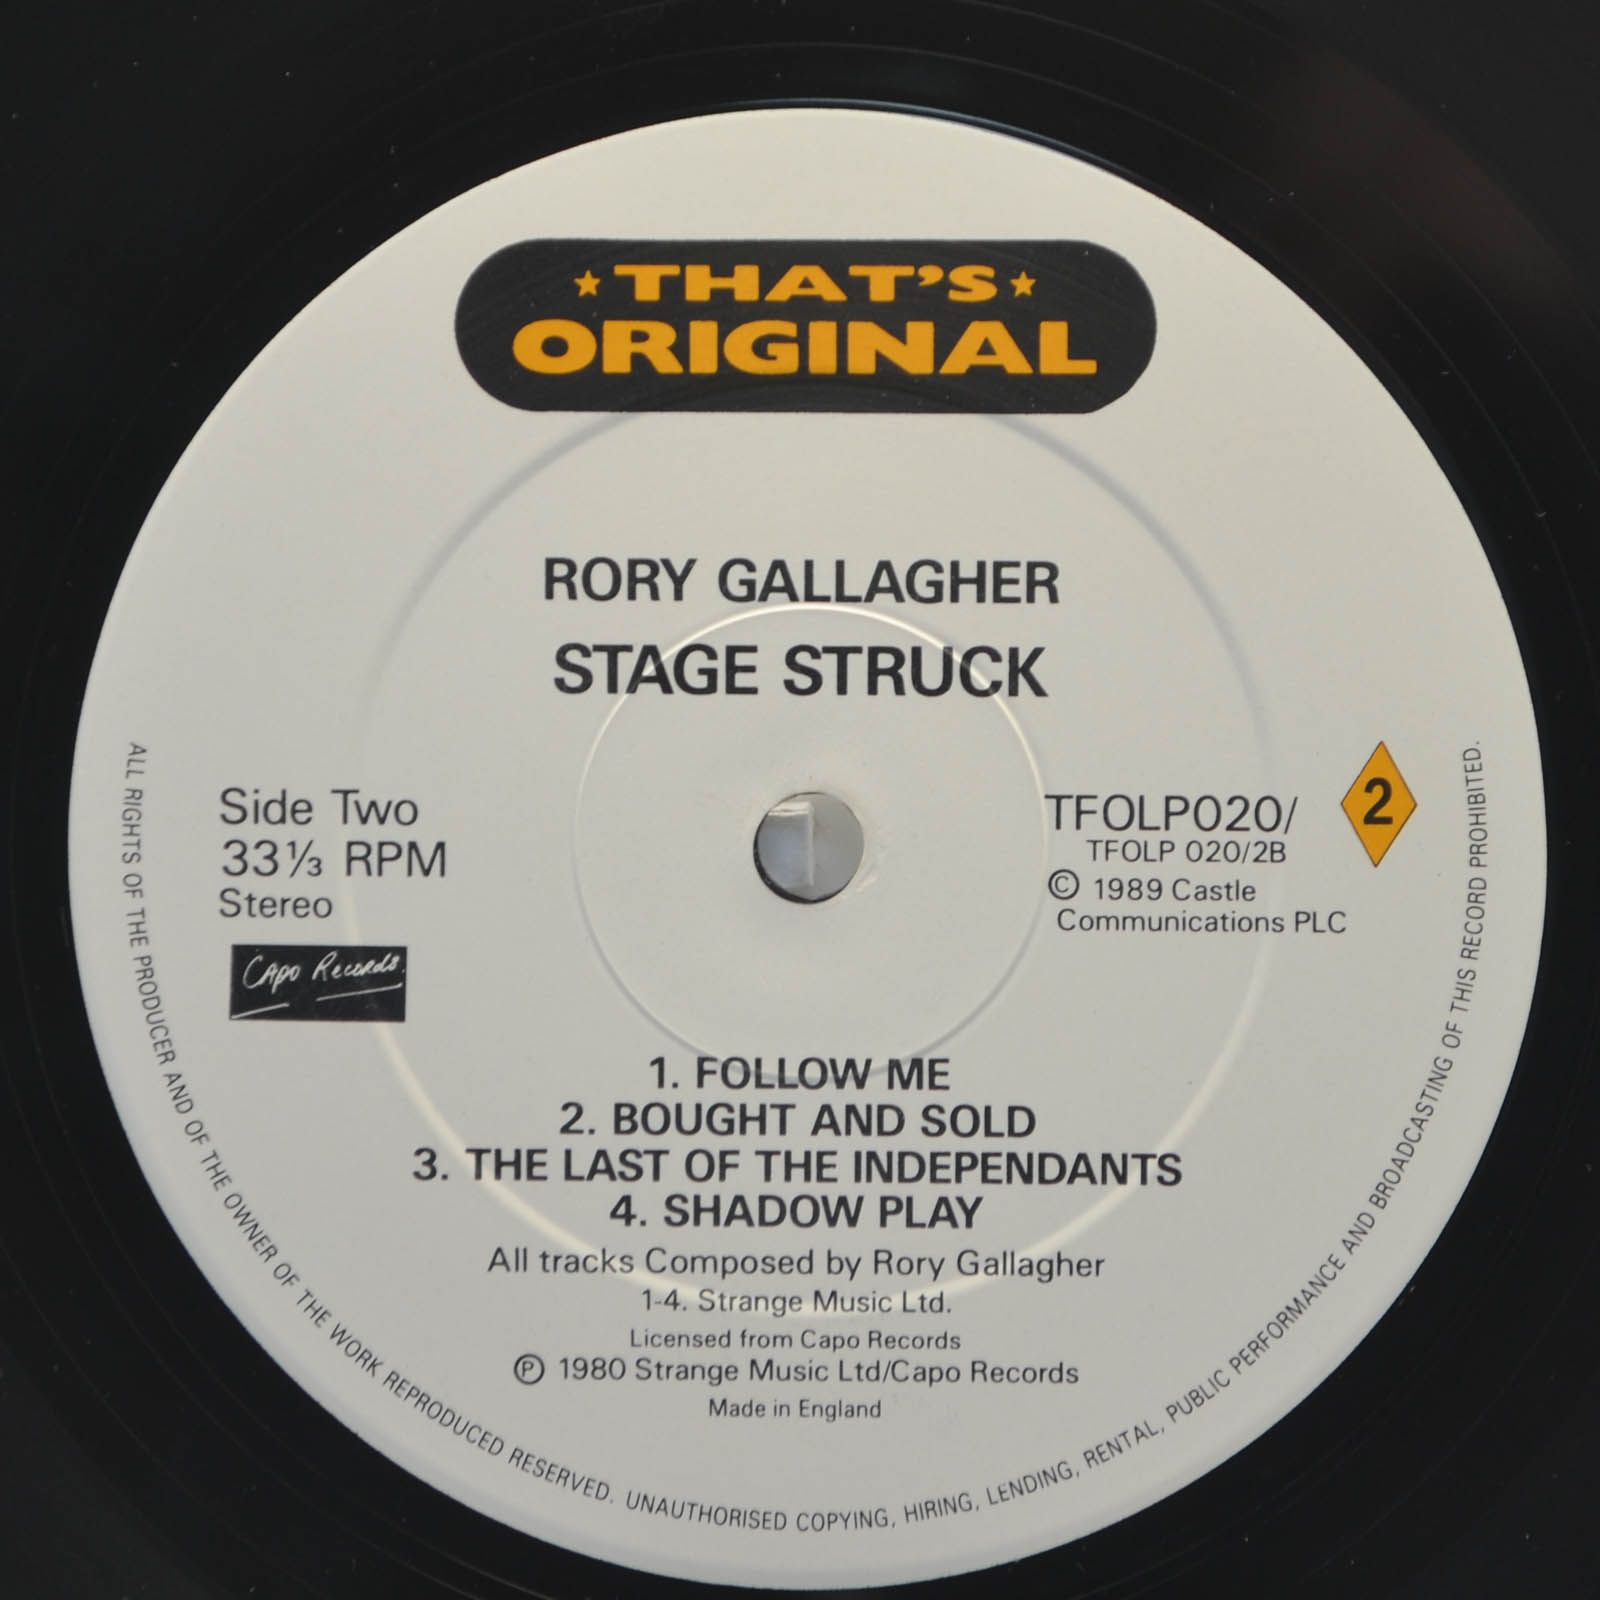 Rory Gallagher — Live! In Europe / Stage Struck (Recorded Live) (2LP, UK), 1989